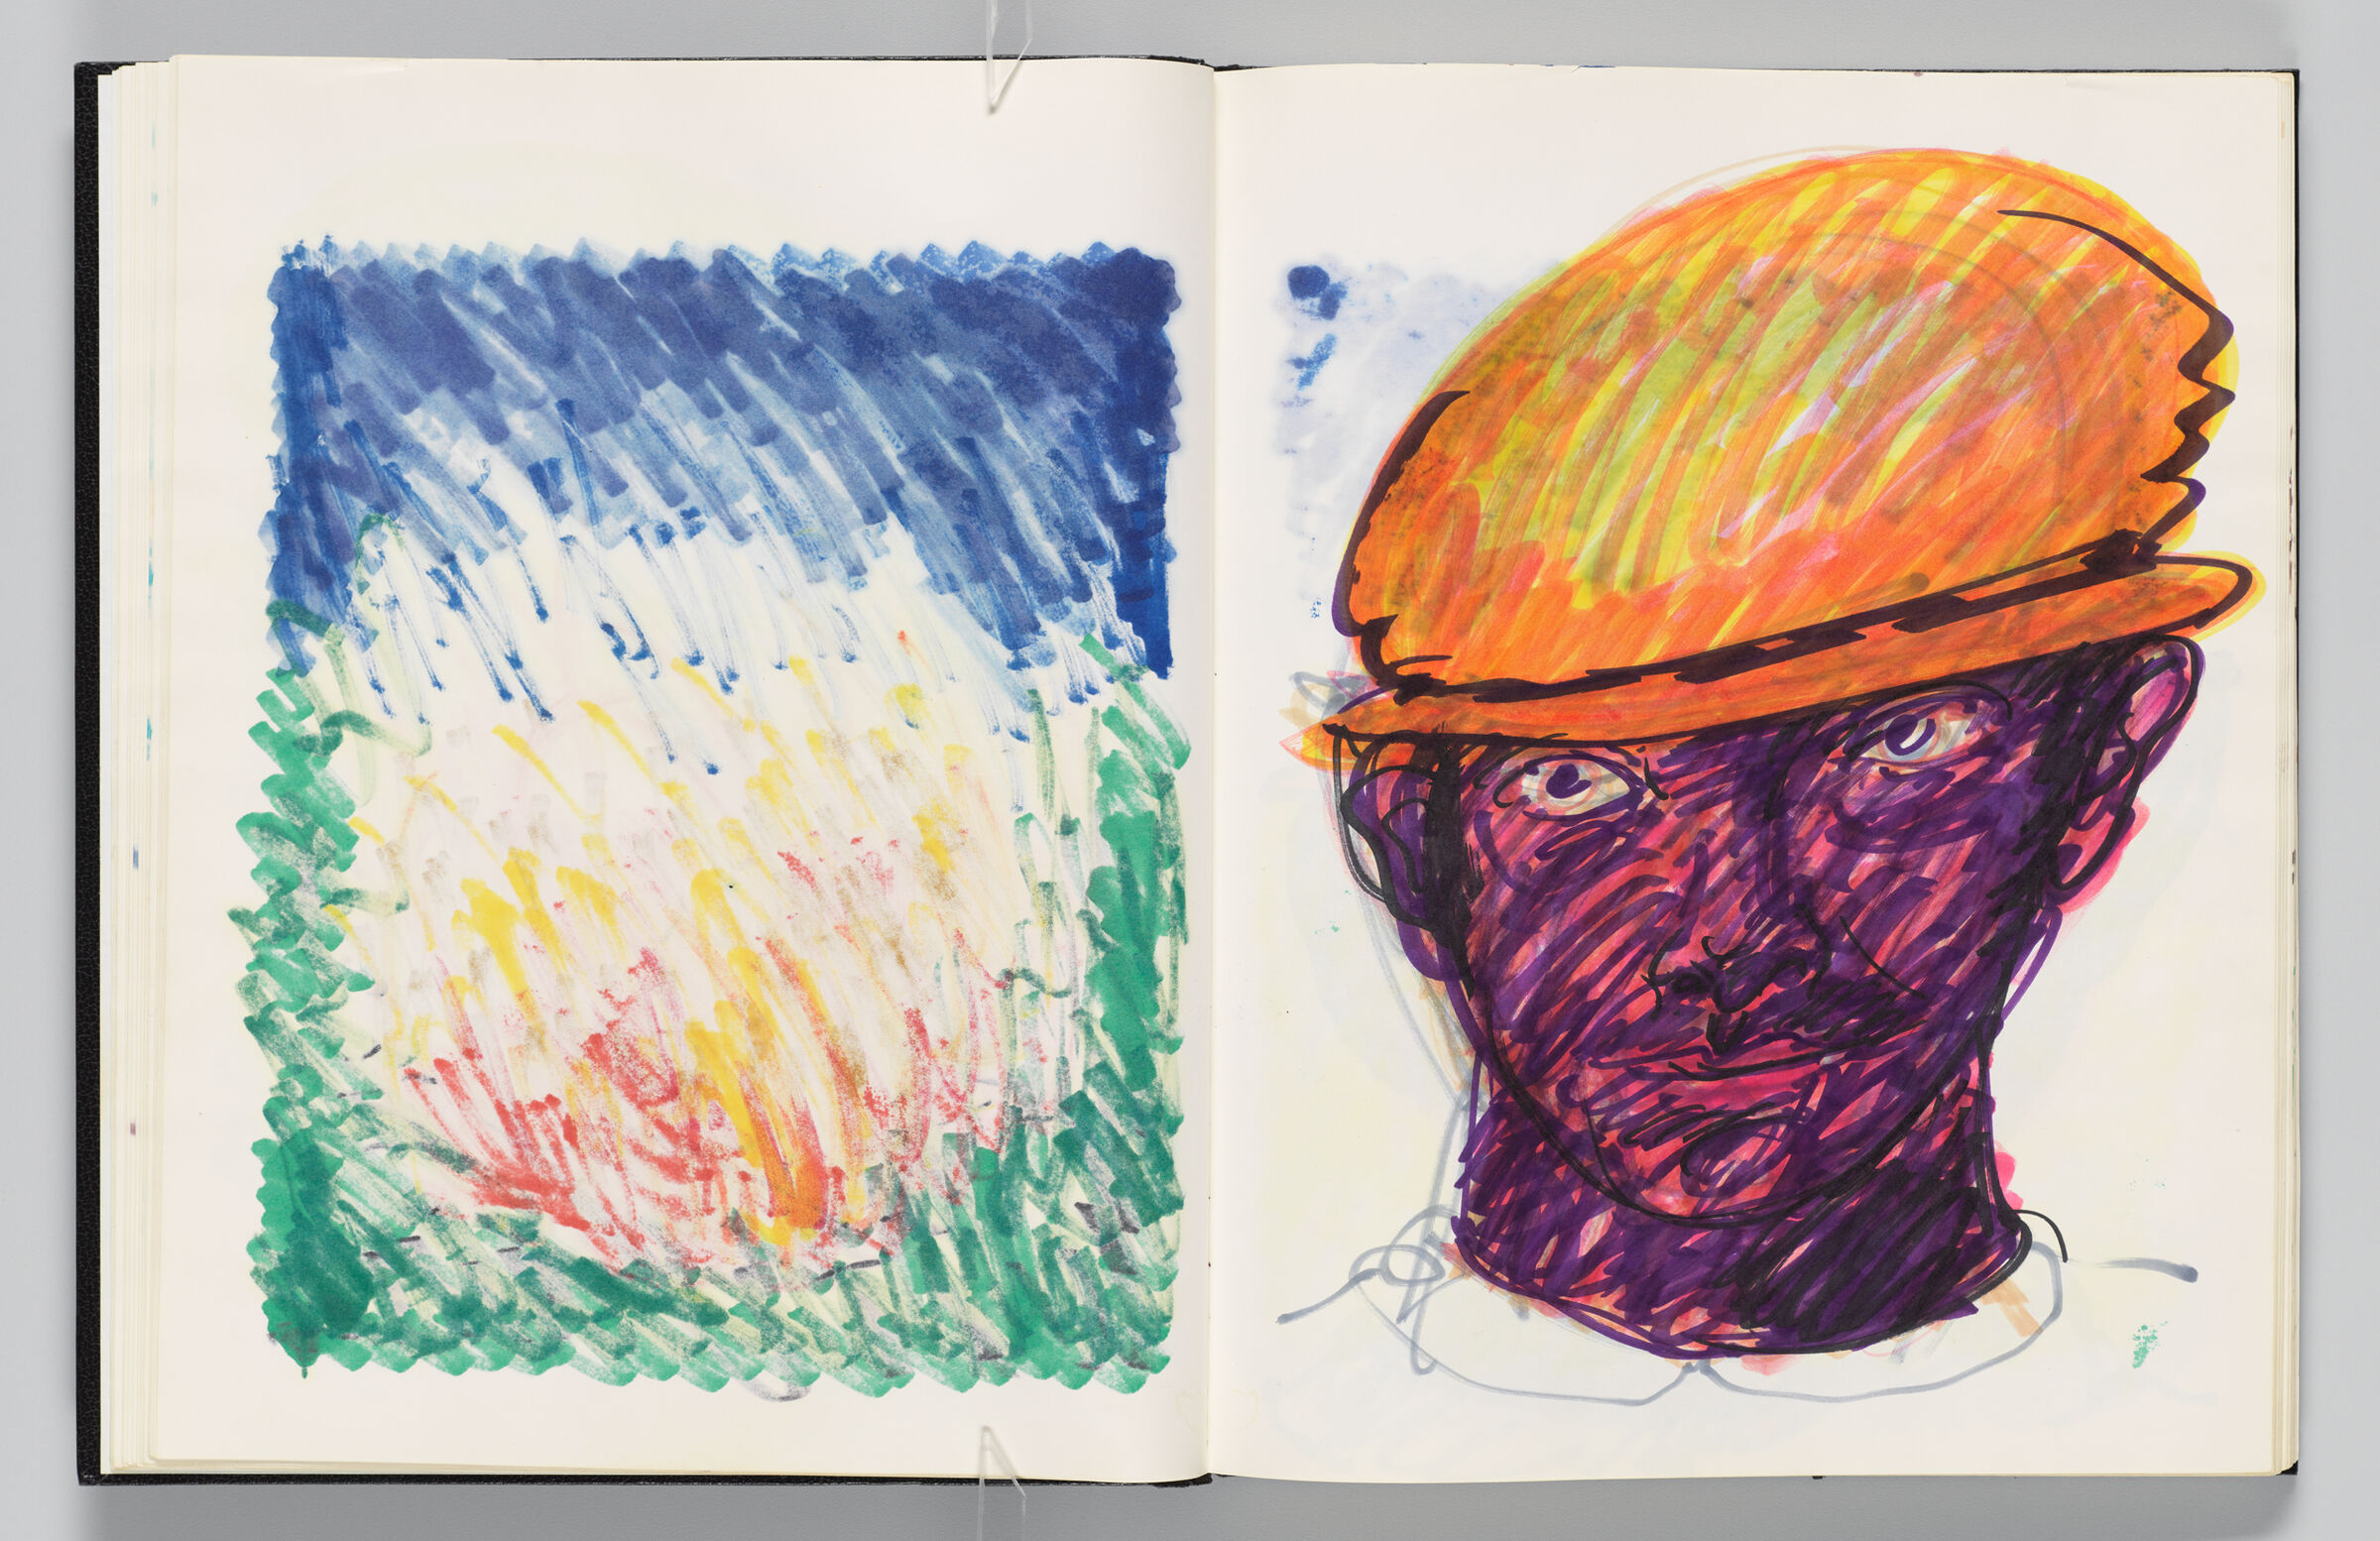 Untitled (Bleed-Through Of Previous Page, Left Page); Untitled (Portrait Of Male Figure With Color Transfer, Right Page)